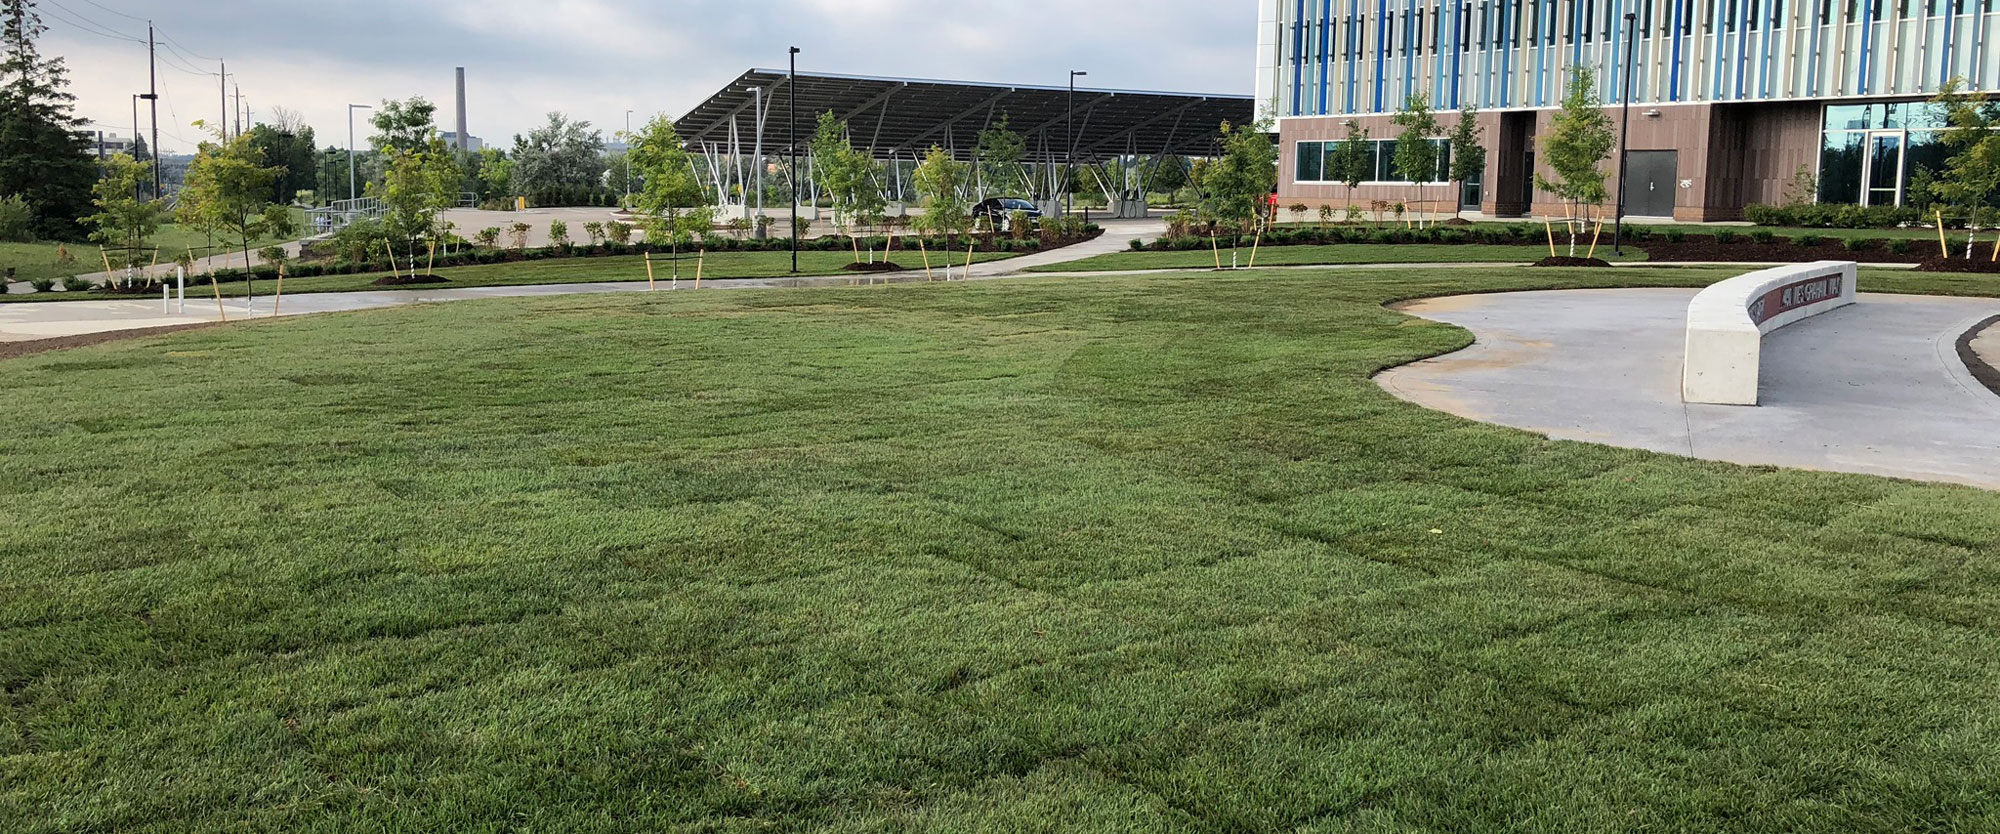 newly layed sod at the Research & Technology Park in Waterloo